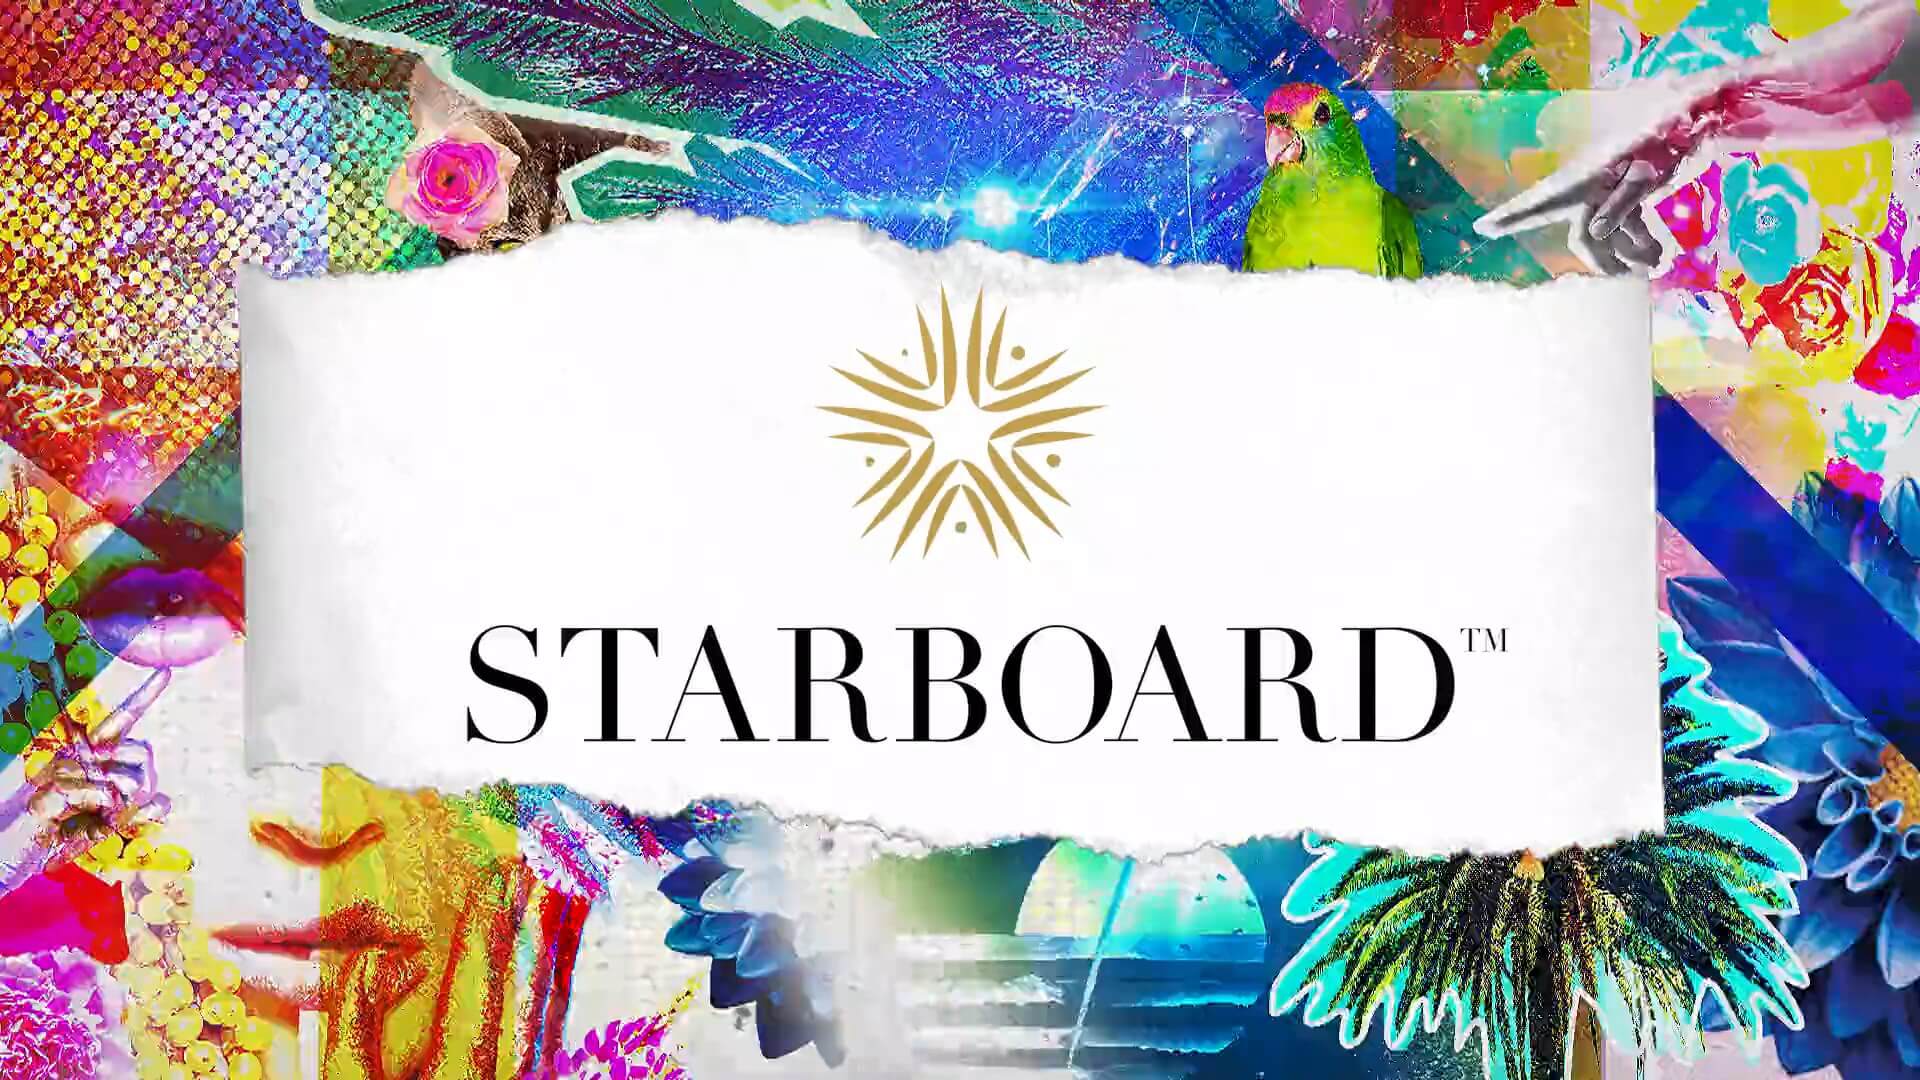 Why Starboard may have cracked the code of Luxury in Travel Retail.